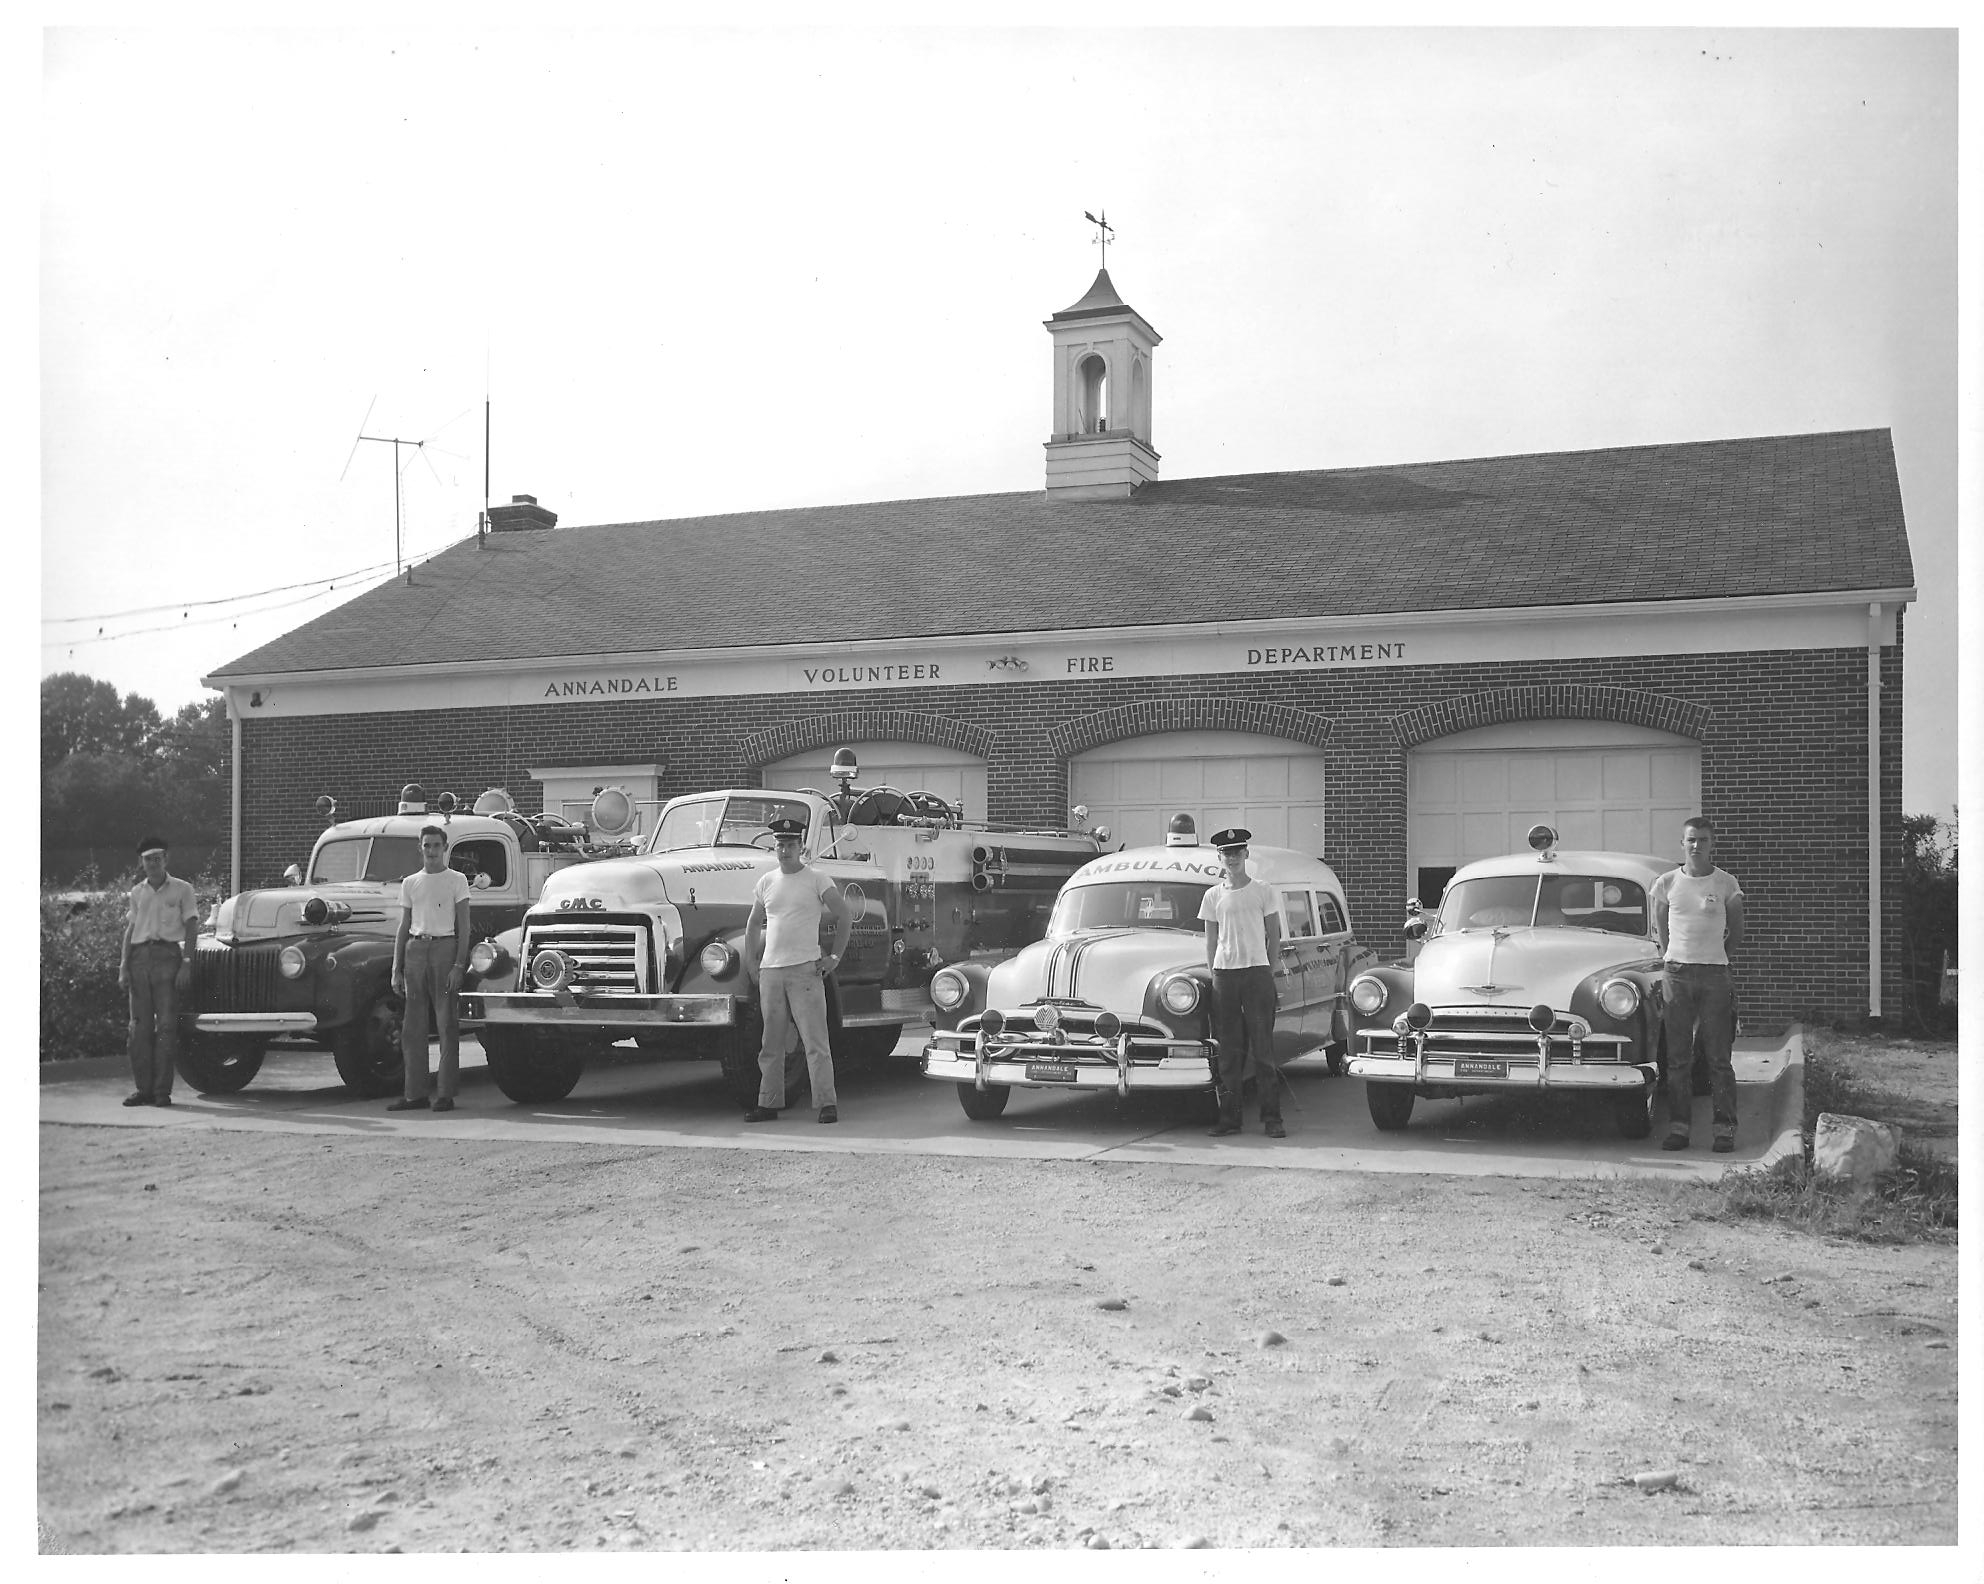 Annandale Volunteer Fire Dept, Summer of 1954. Photo courtesy of the Annandale Chamber of Commerce Photographic Archive with all rights of use reserved.